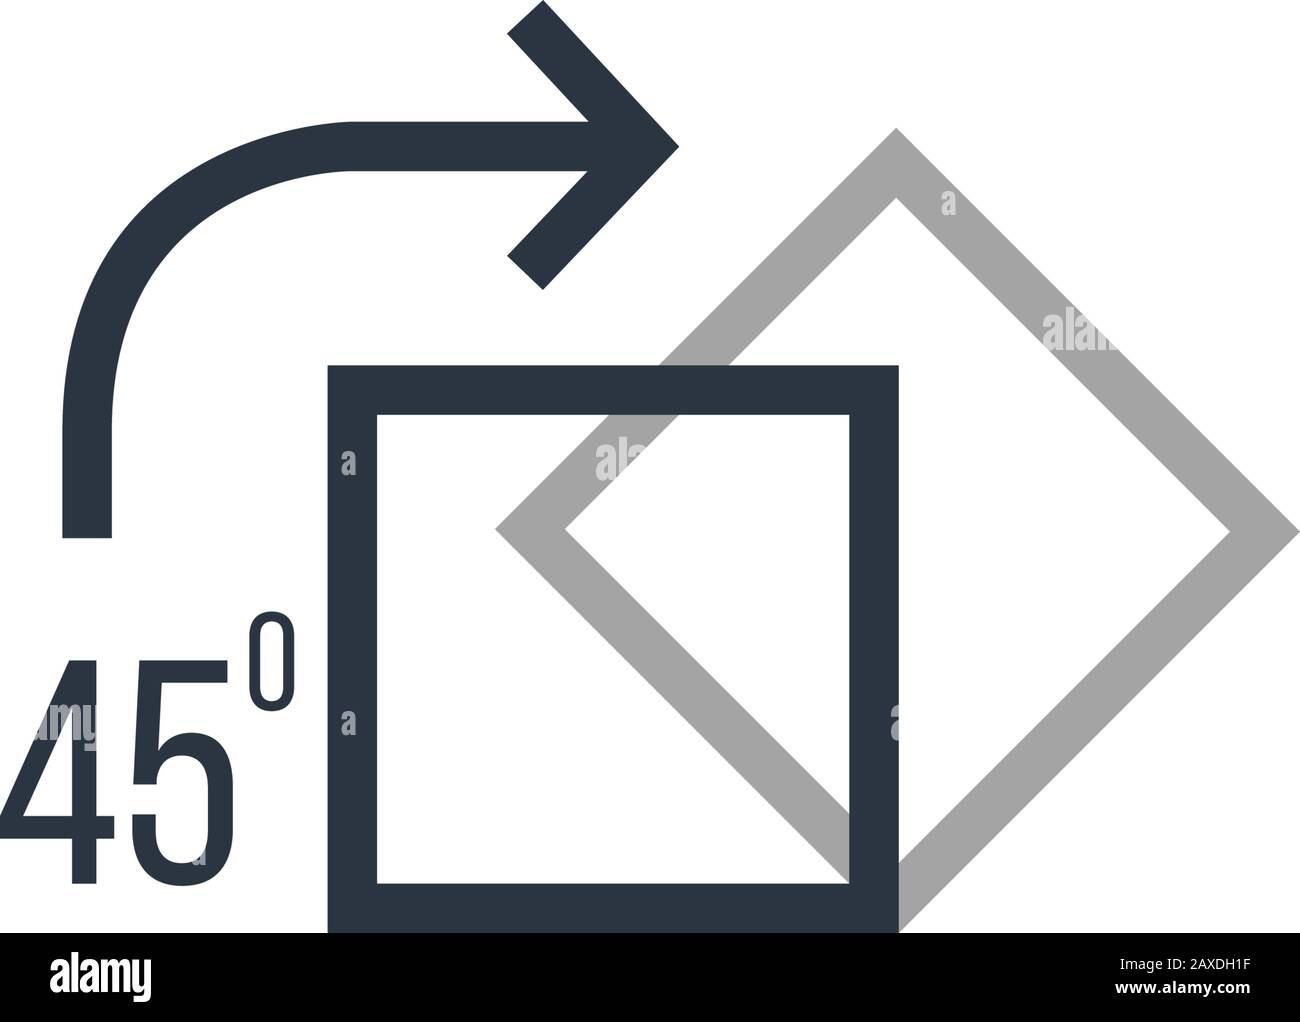 Rotate element square and arrow. 45 degree angle rotation tool clockwise. Stock Vector illustration Stock Vector